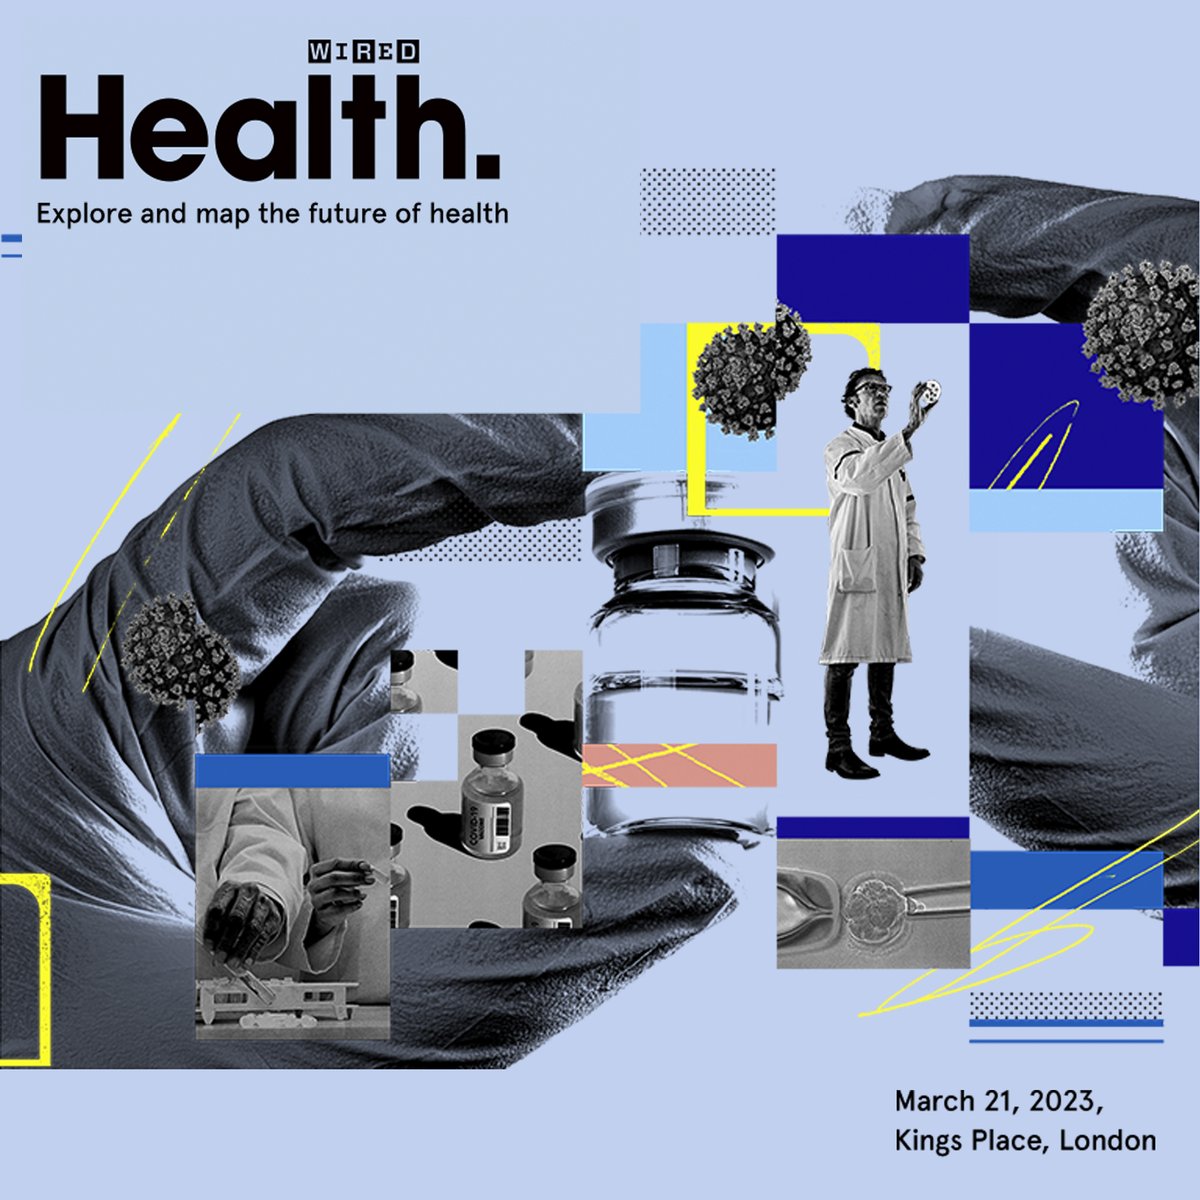 Final countdown! In @accexible we are very excited to take part on @WiredUK's health event. We will share our latest news on vocal biomarkers and the detection of mental health conditions. 
health.wired.com
#WIREDHealth #digital #health #Prevention